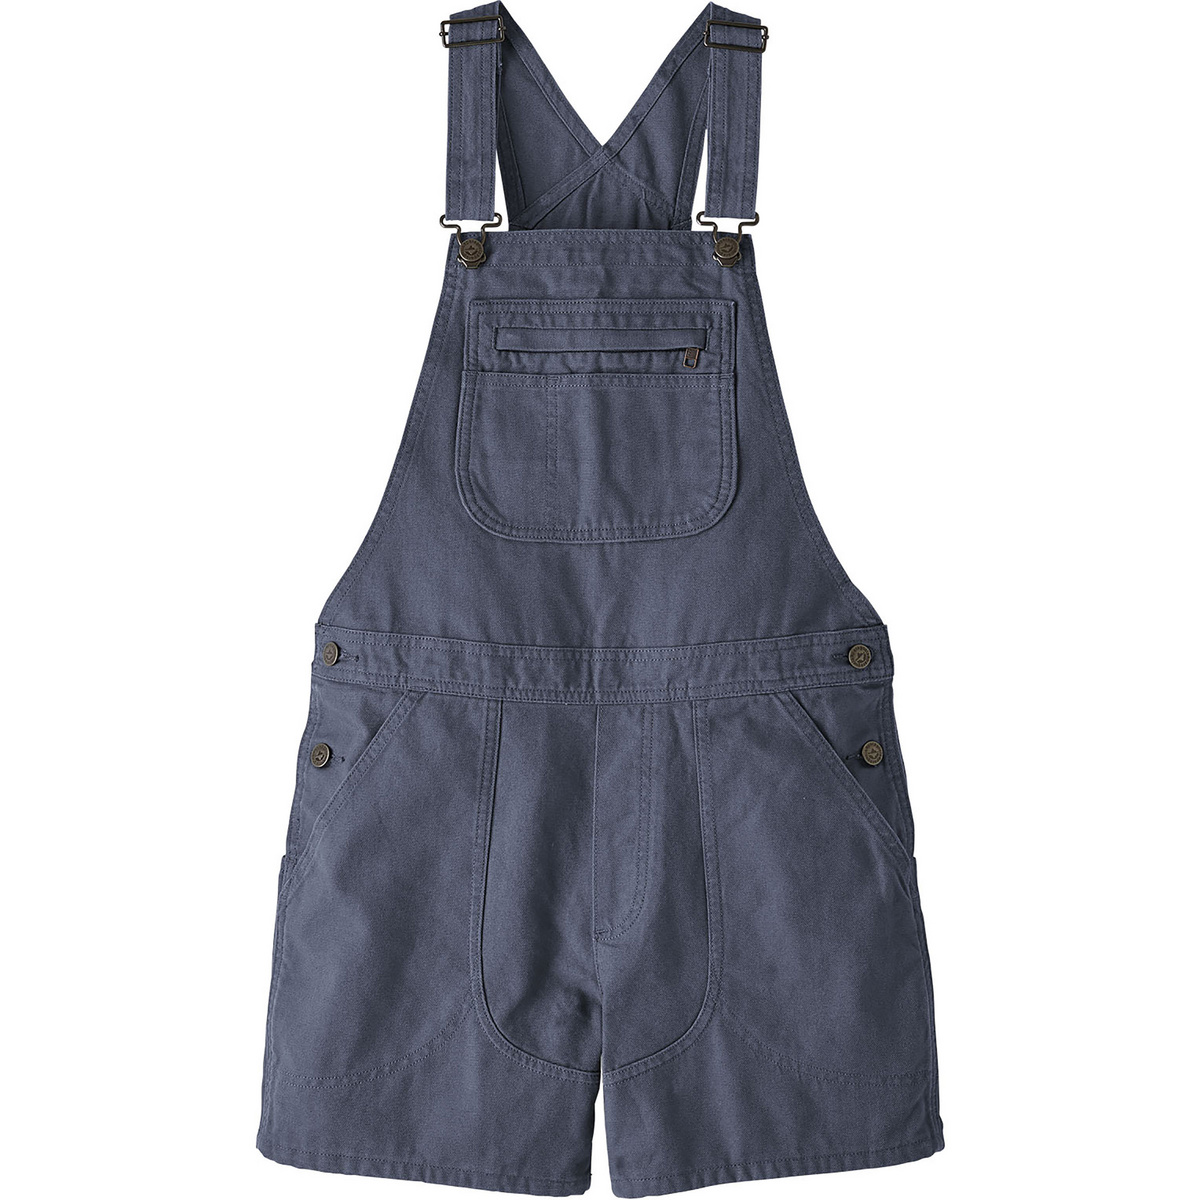 Patagonia Damen Stand Up Overall von Patagonia